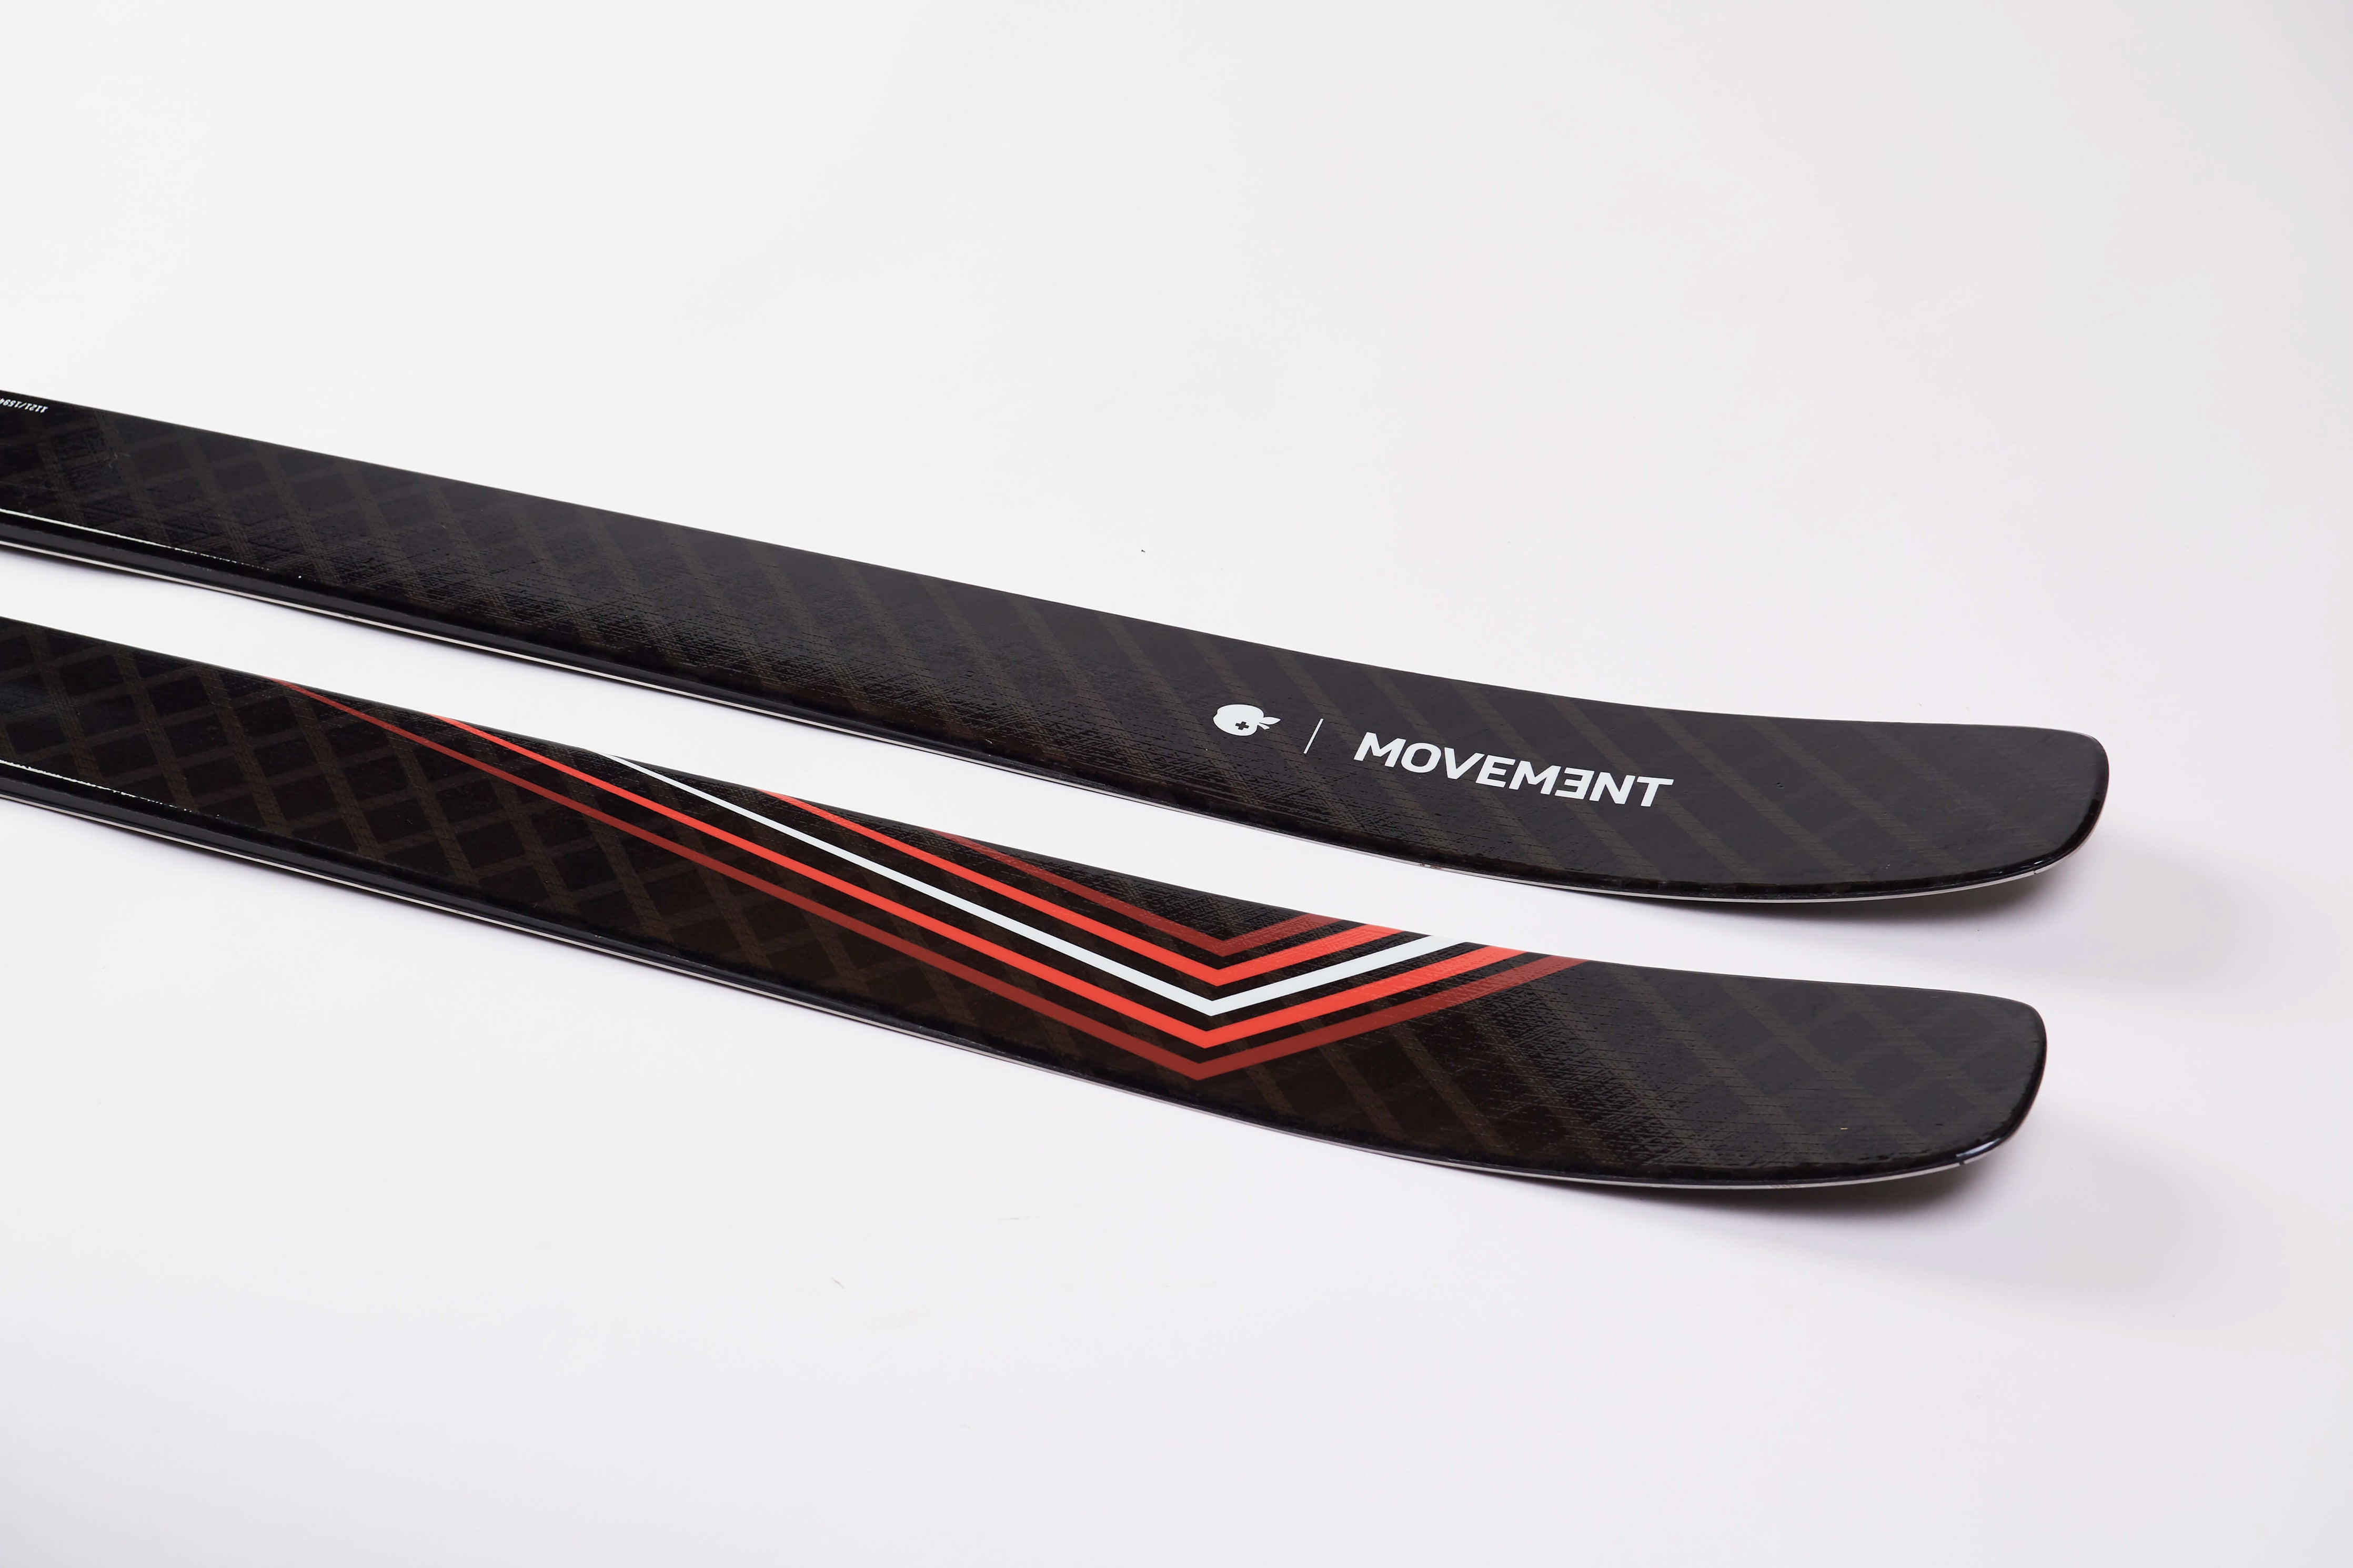 Unleash my touring potential with Movement&#39;s Alp Tracks 98 touring skis.